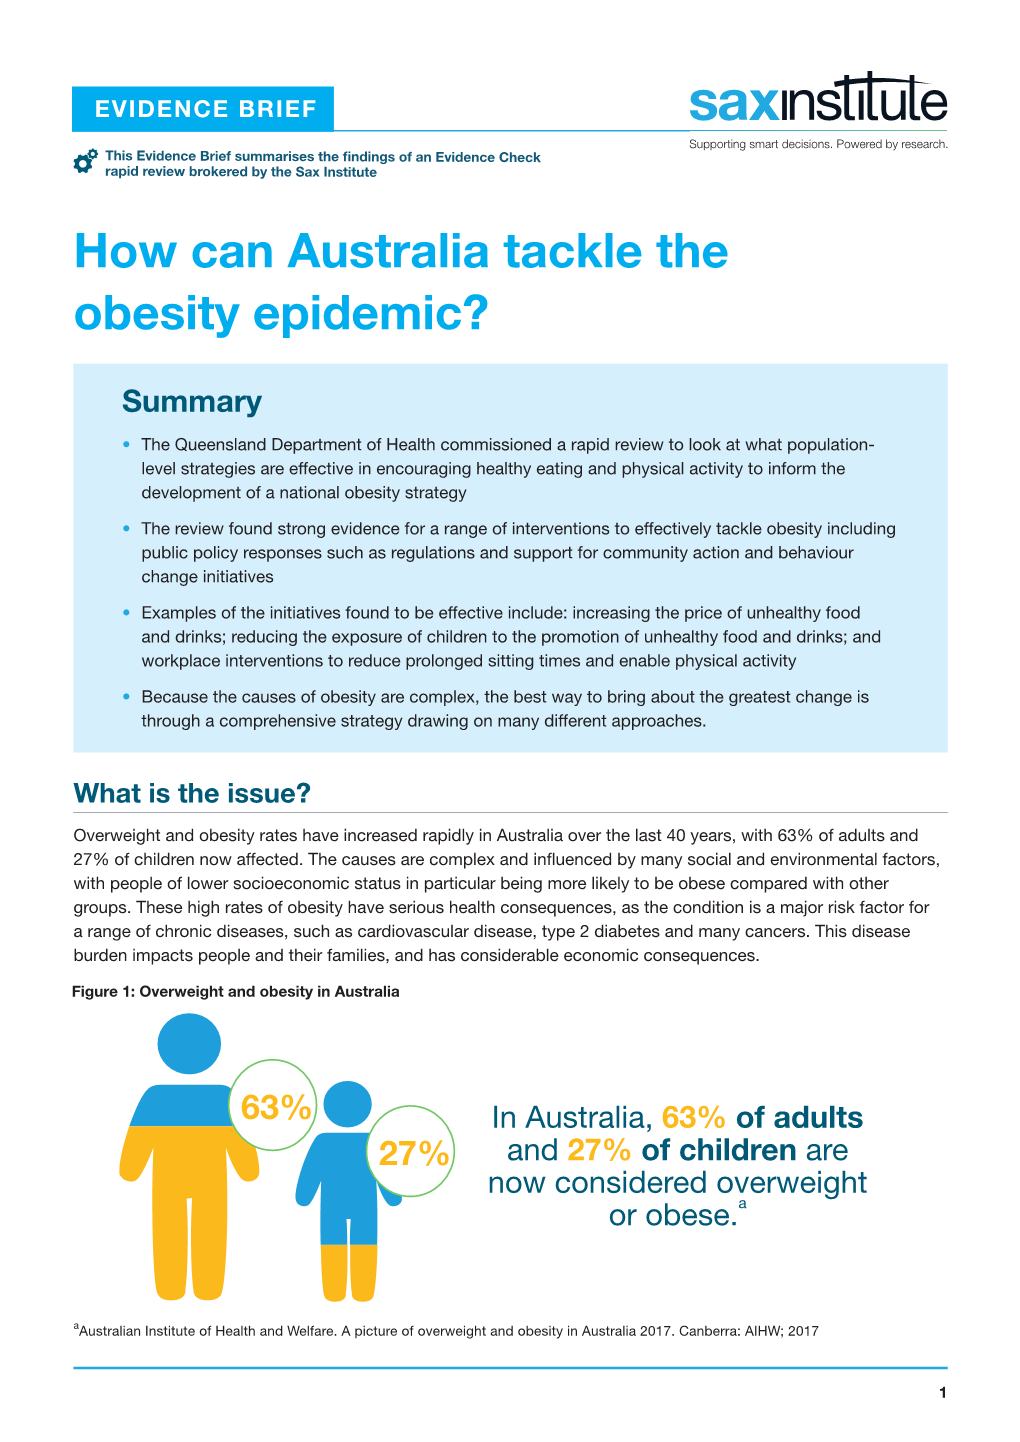 How Can Australia Tackle the Obesity Epidemic?